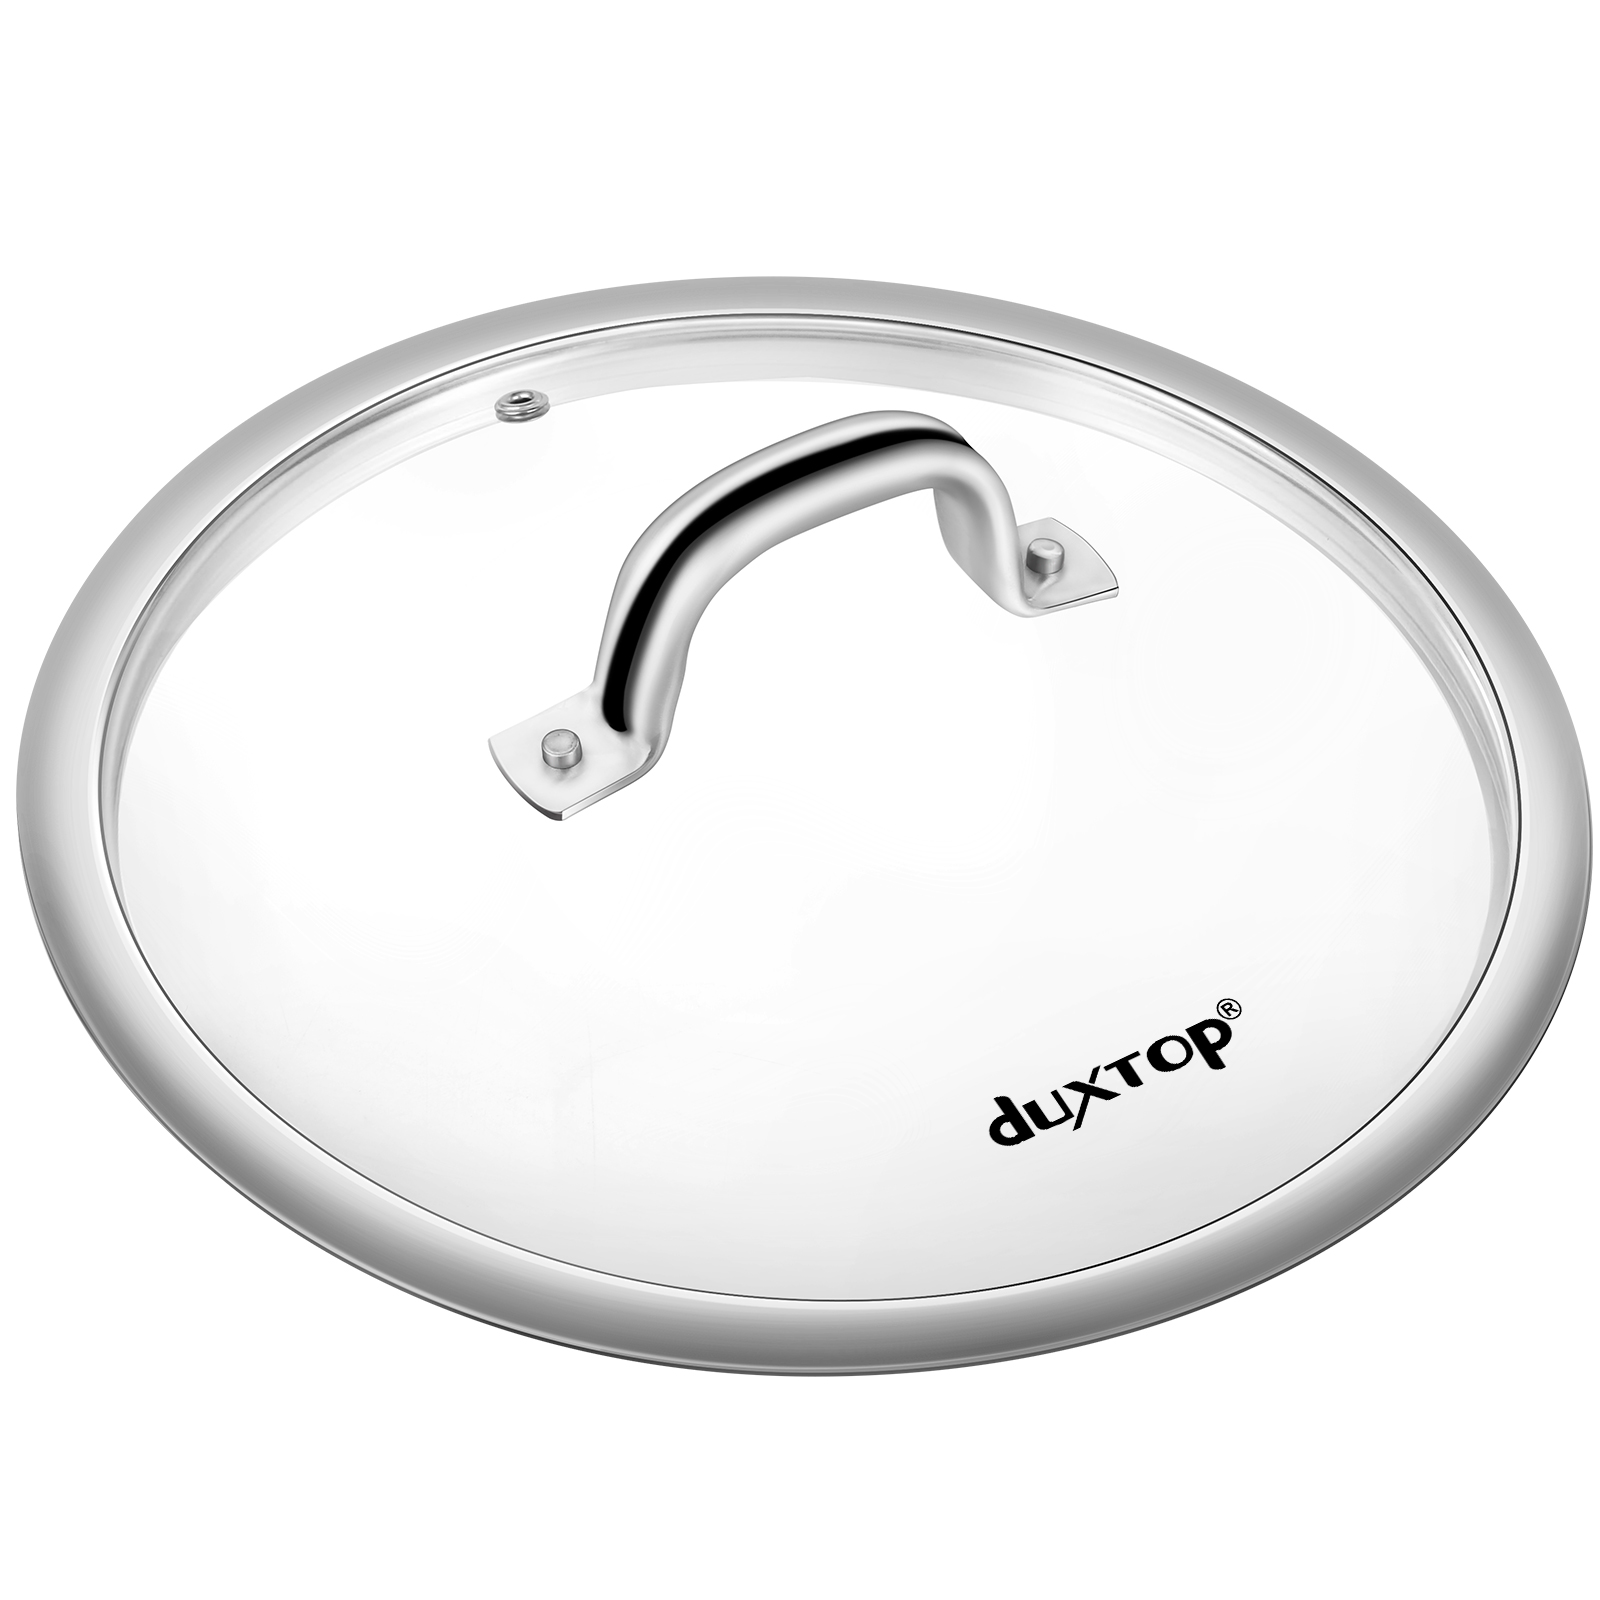 Duxtop Cookware Glass Replacement Lid (8 Inches) - The Secura